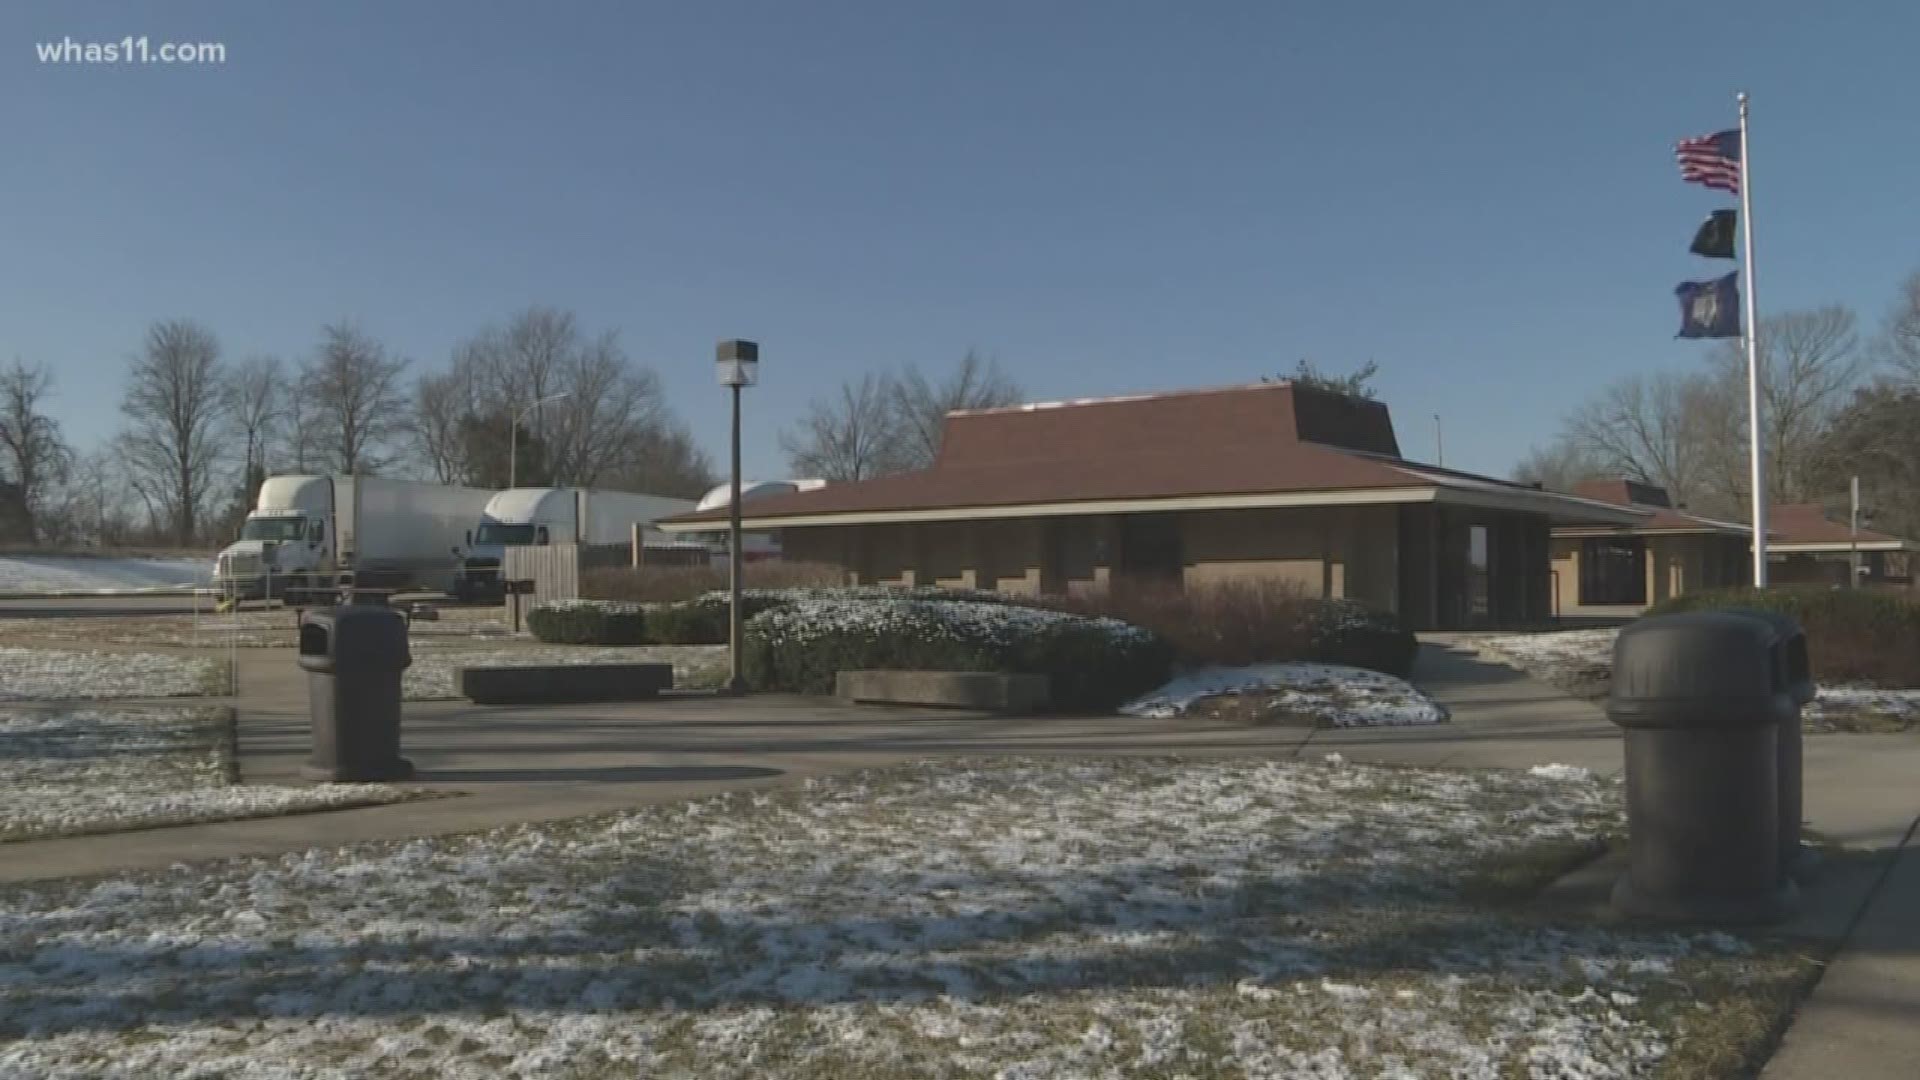 A viewer had a question about why a certain rest stop in Oldham County had a bizarre schedule. We asked some questions to find out "WHAS Up" with that.